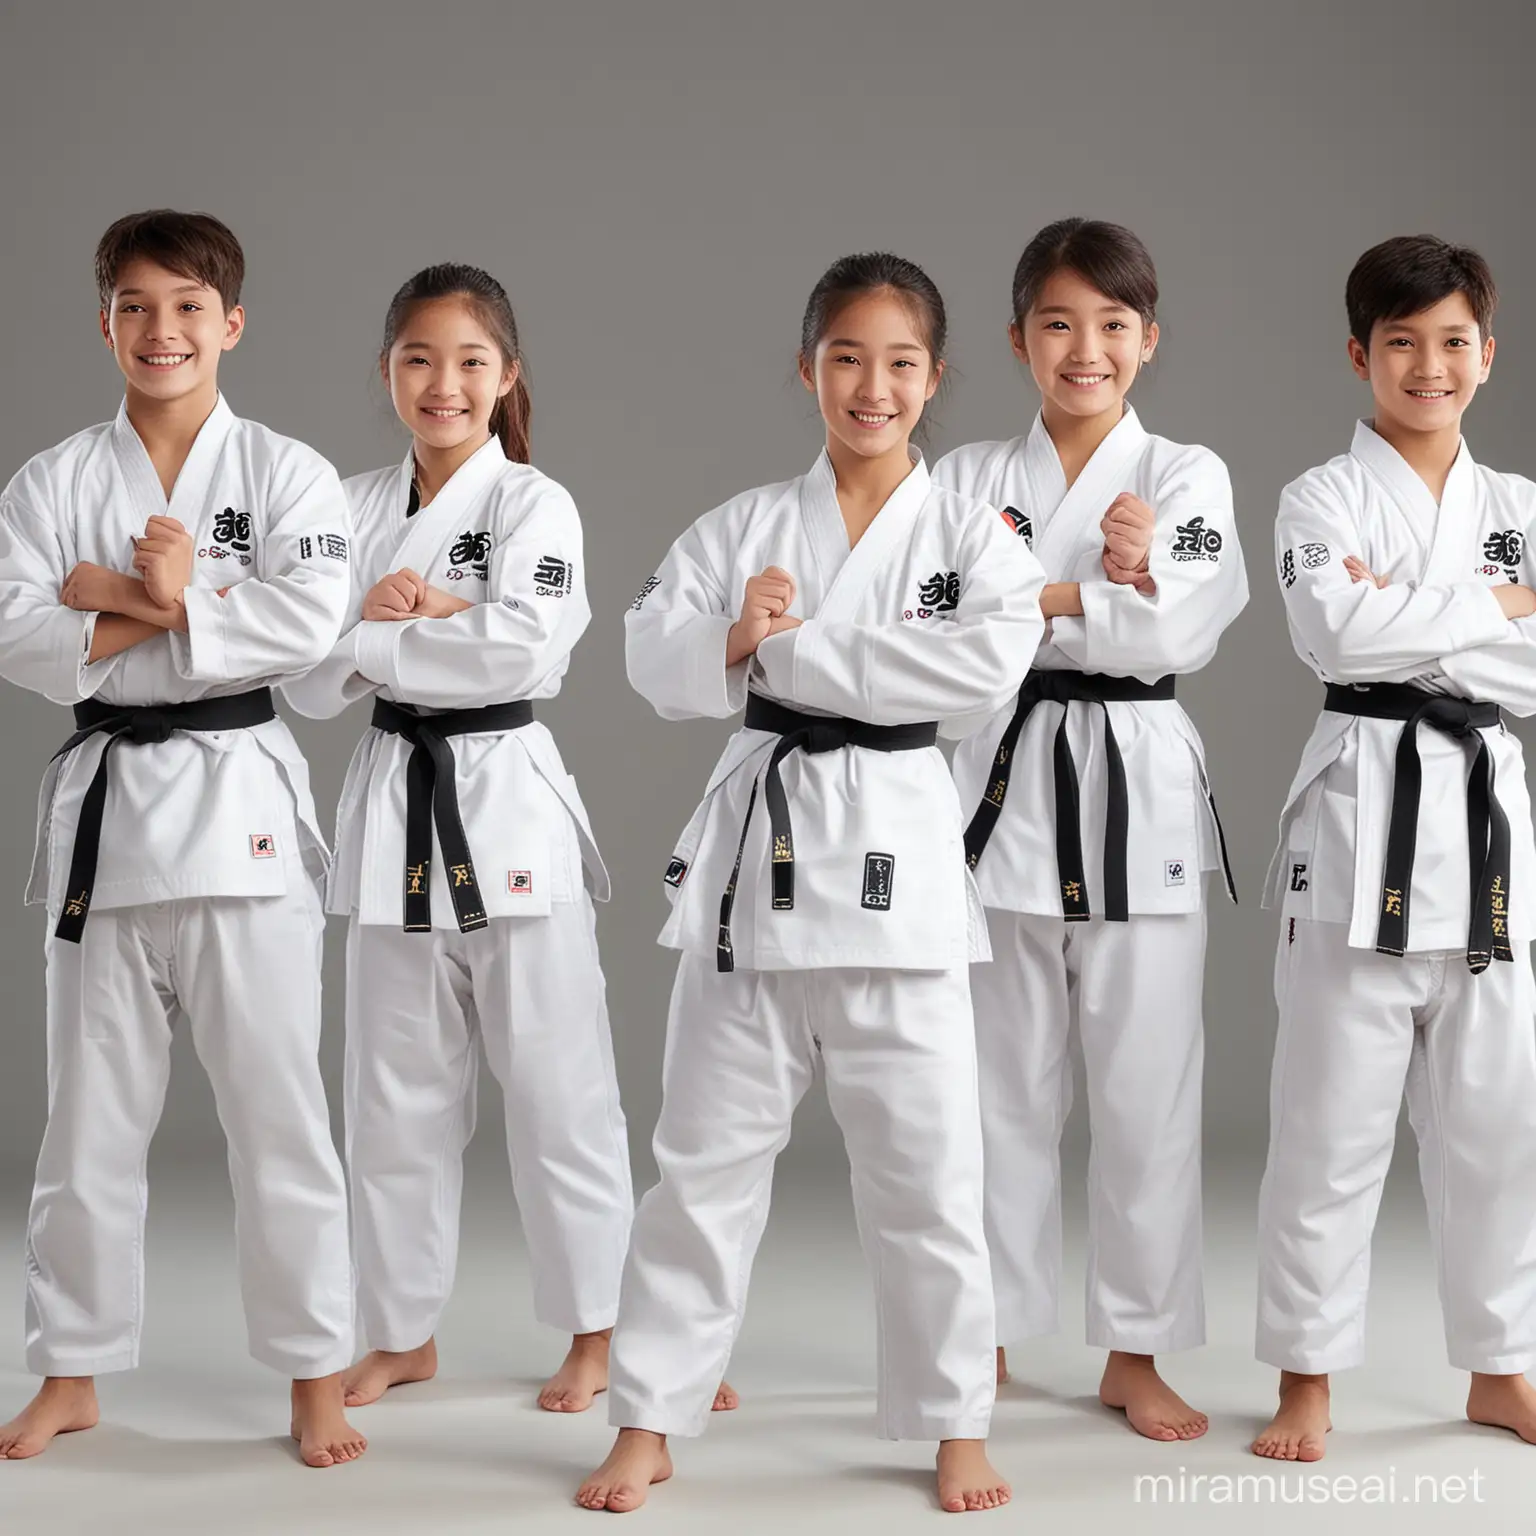 Give me a realistic 16k photo of young taekwondo athletes in white dobok, cheerful mood